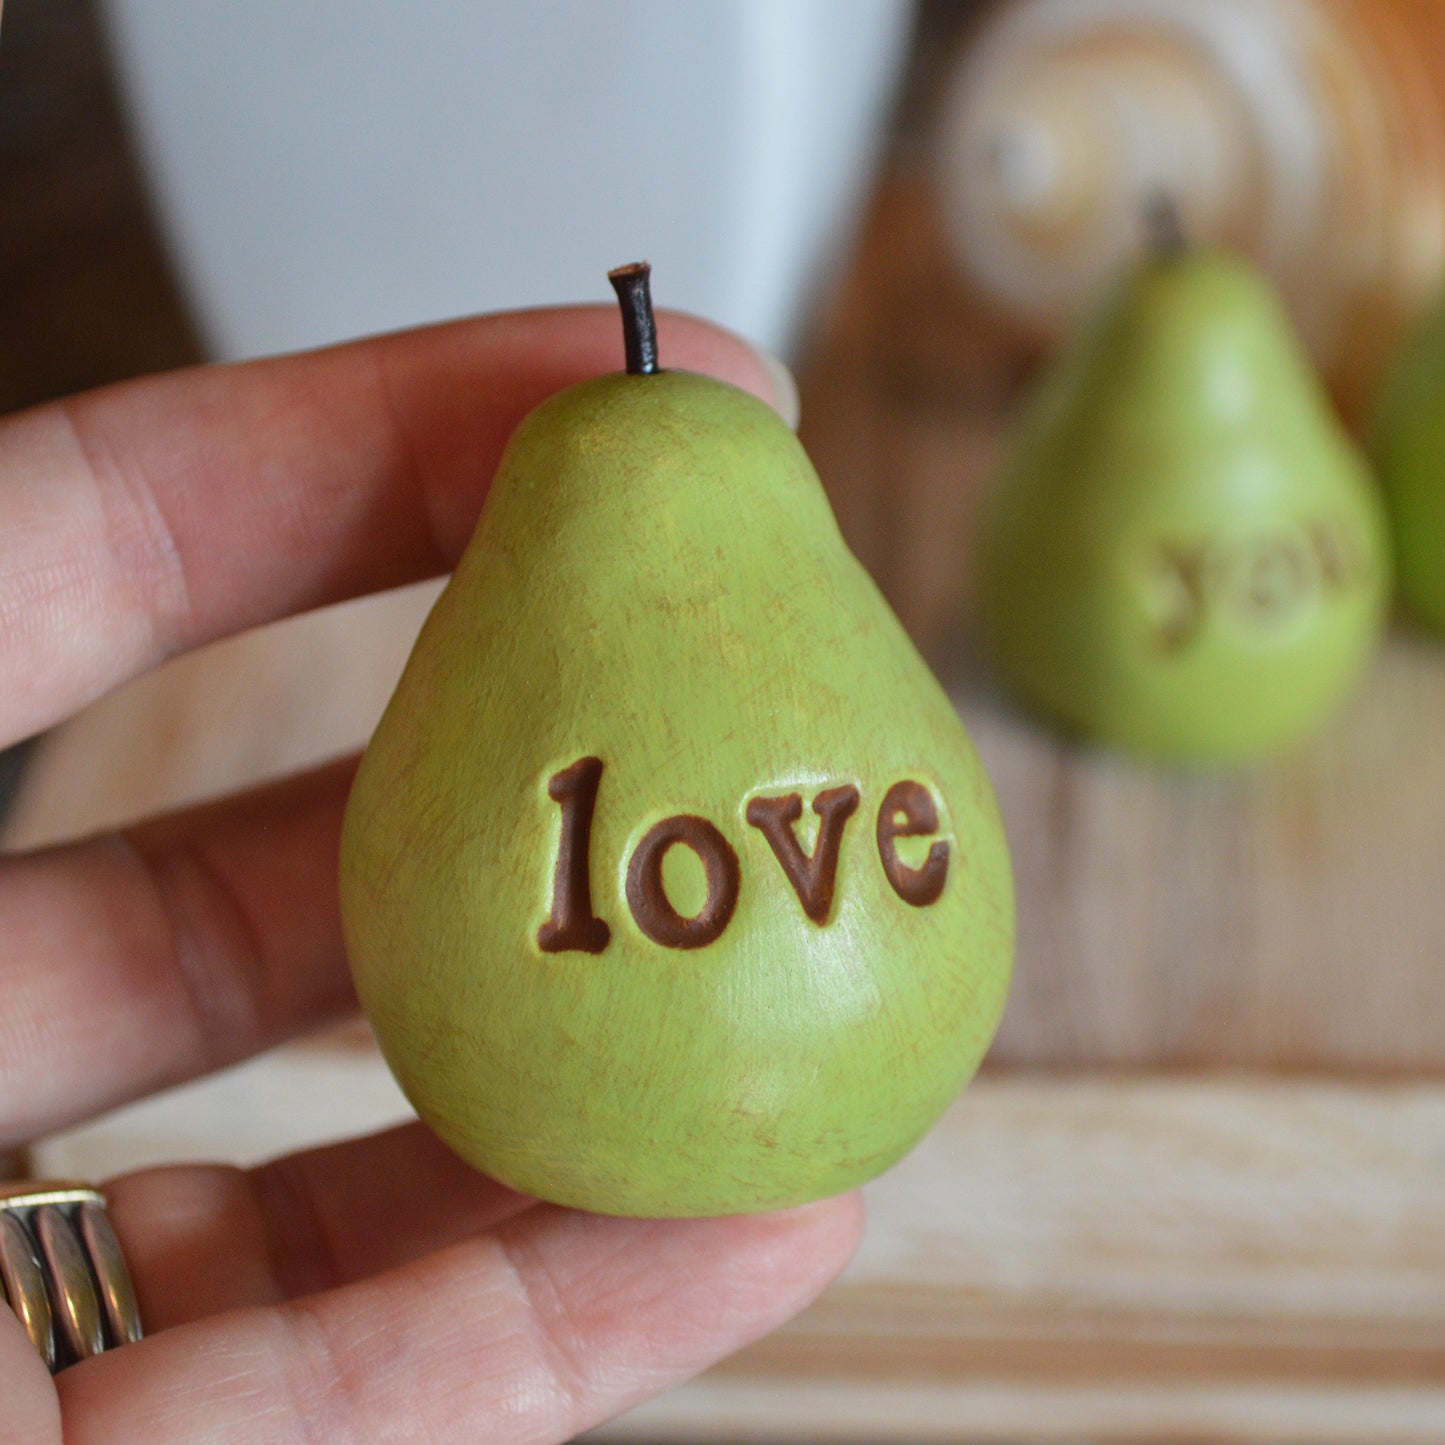 Gift for mom / Mother's Day Birthday gift for mothers / 3 green love you mom pears